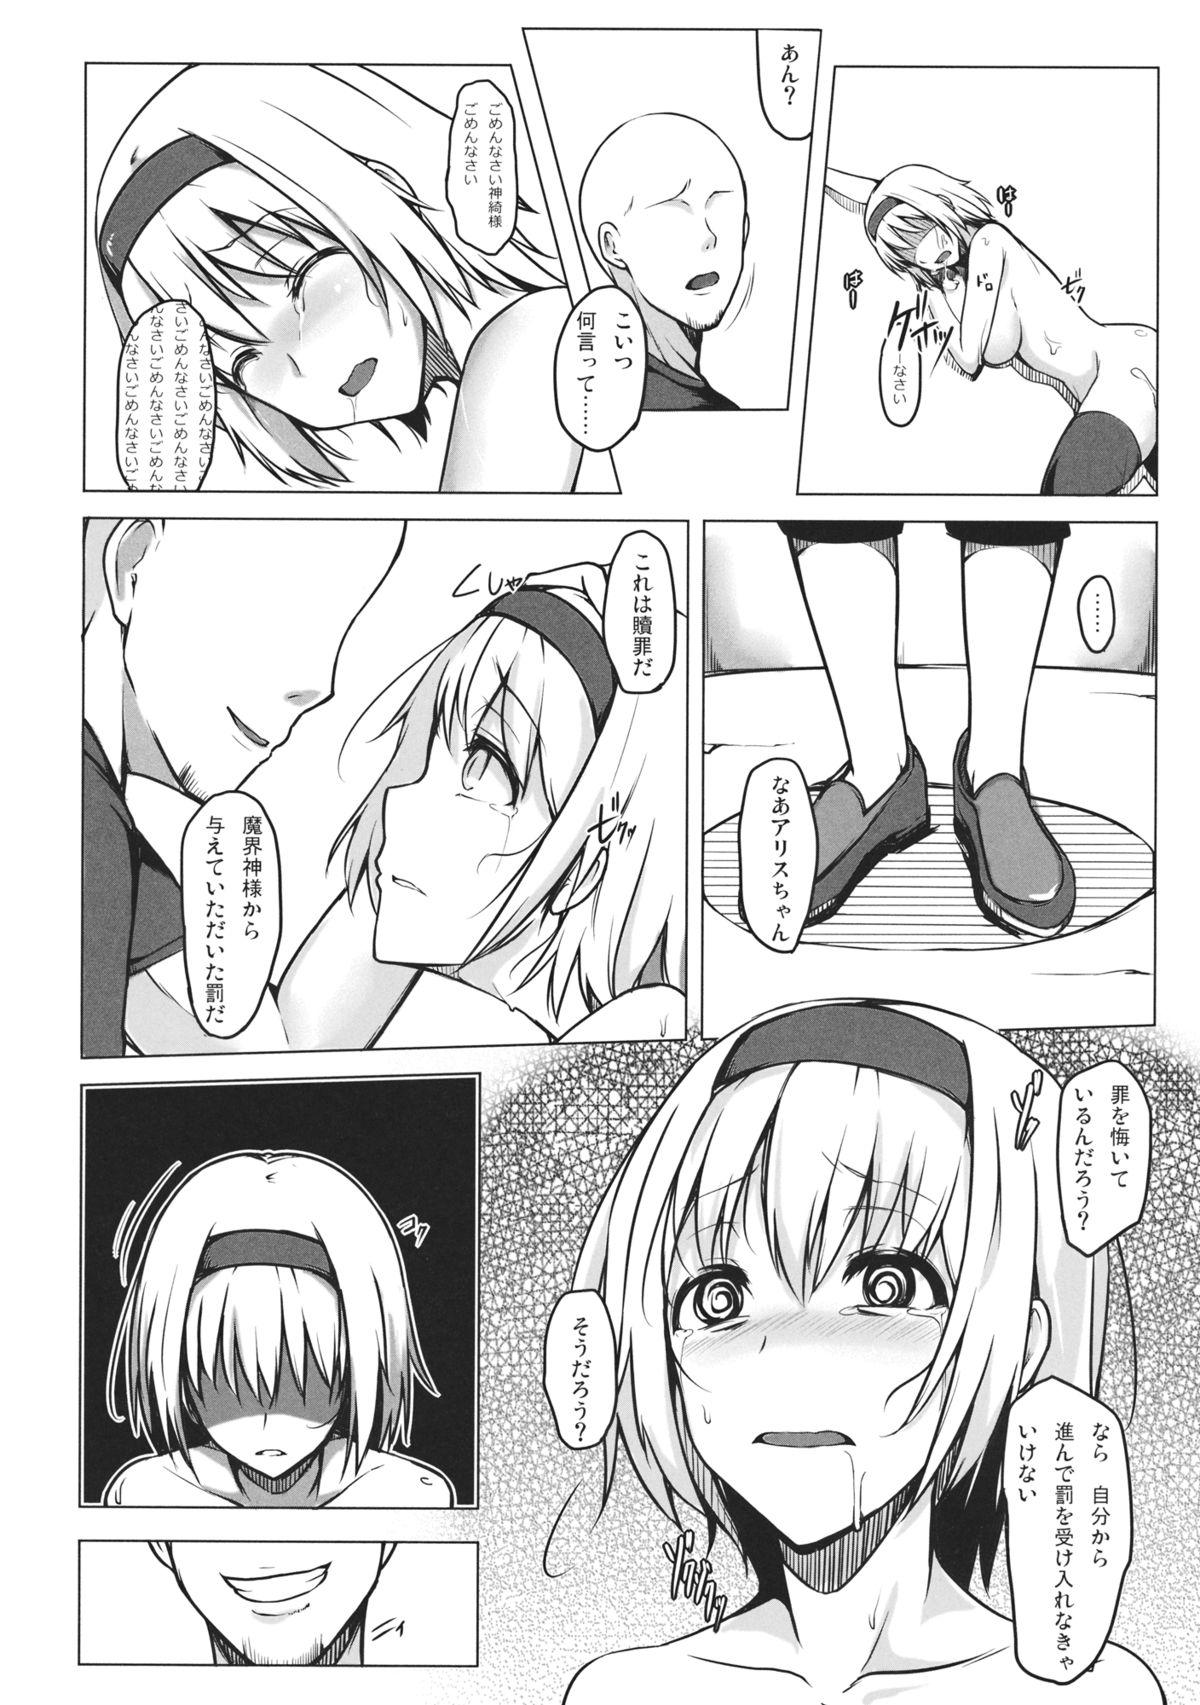 Bisex ALICECOMPLEX - Touhou project Interracial Porn - Page 7